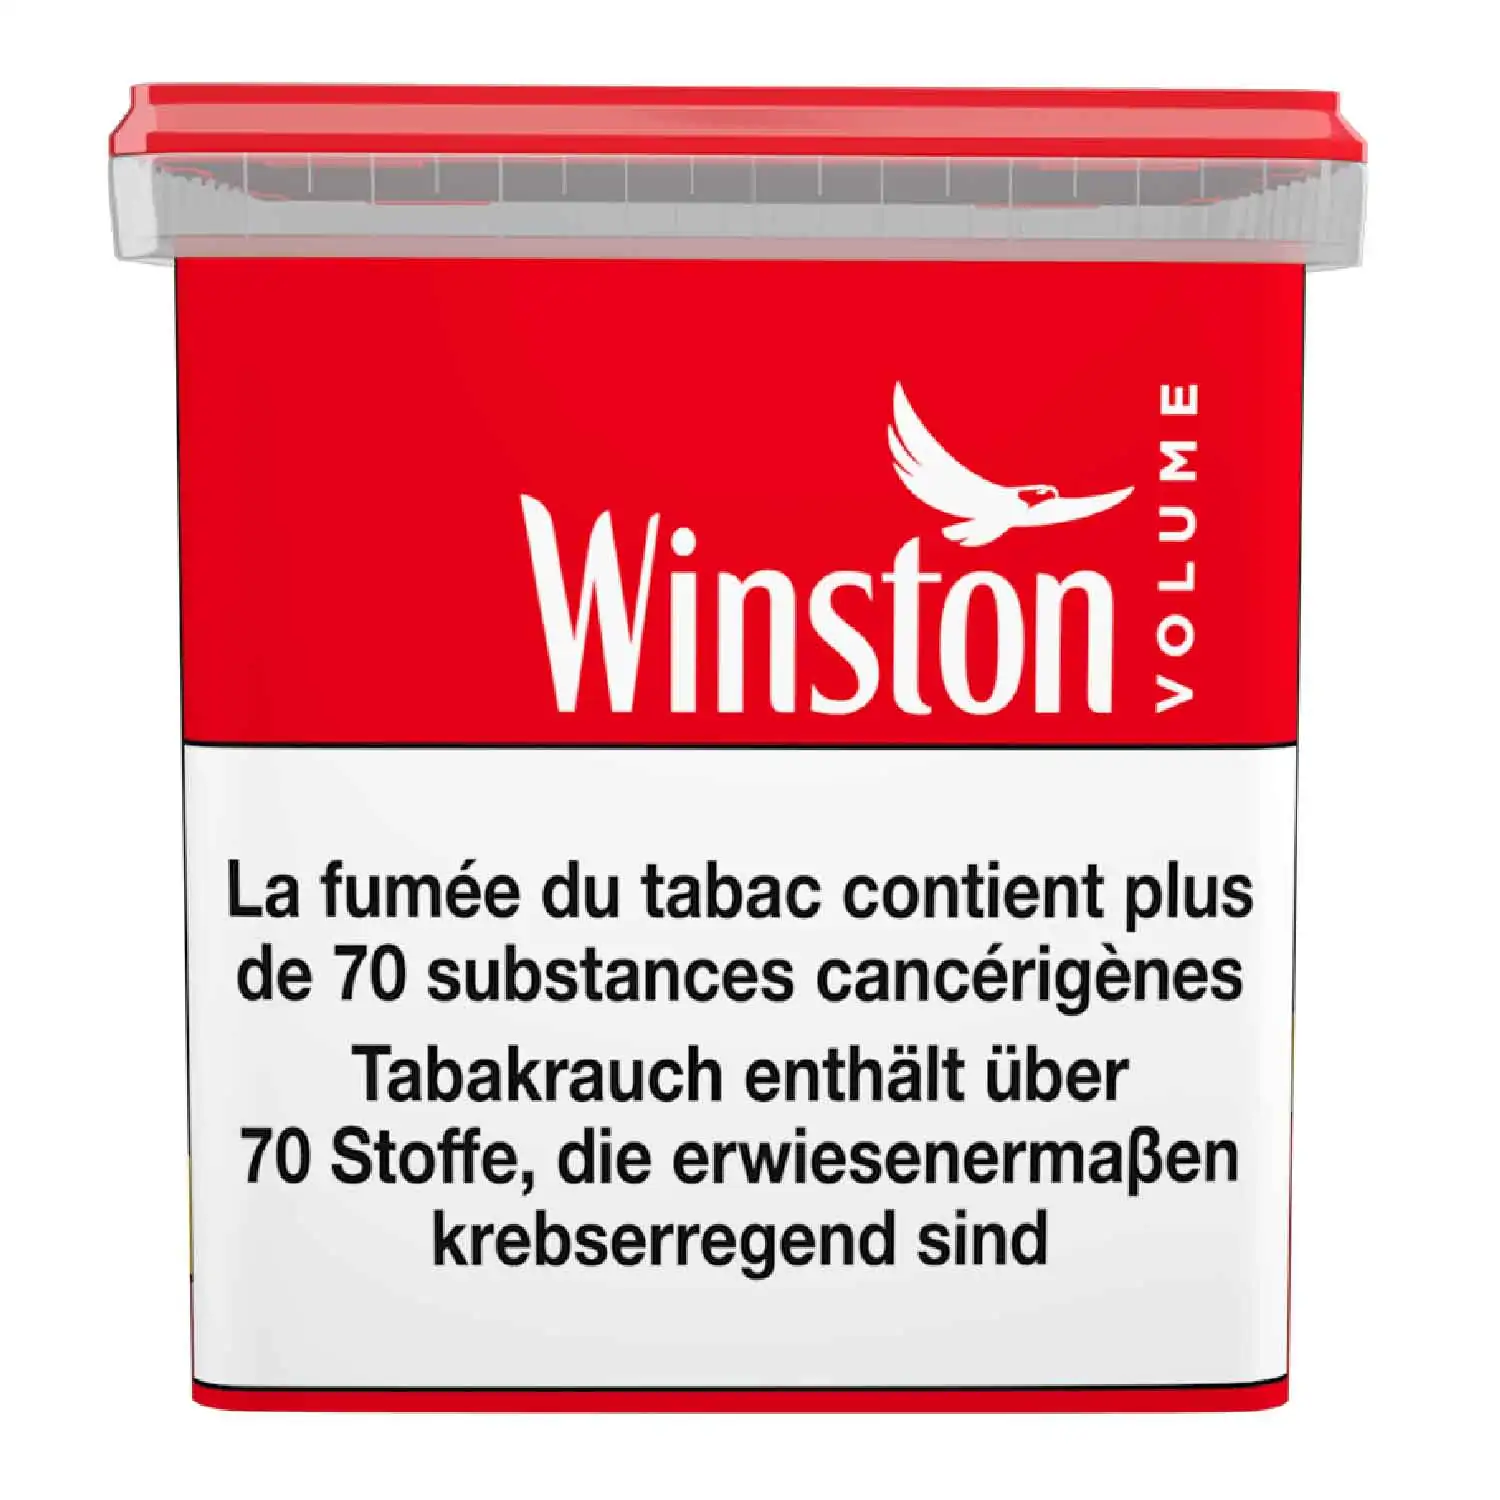 Winston volume red 650g - Buy at Real Tobacco